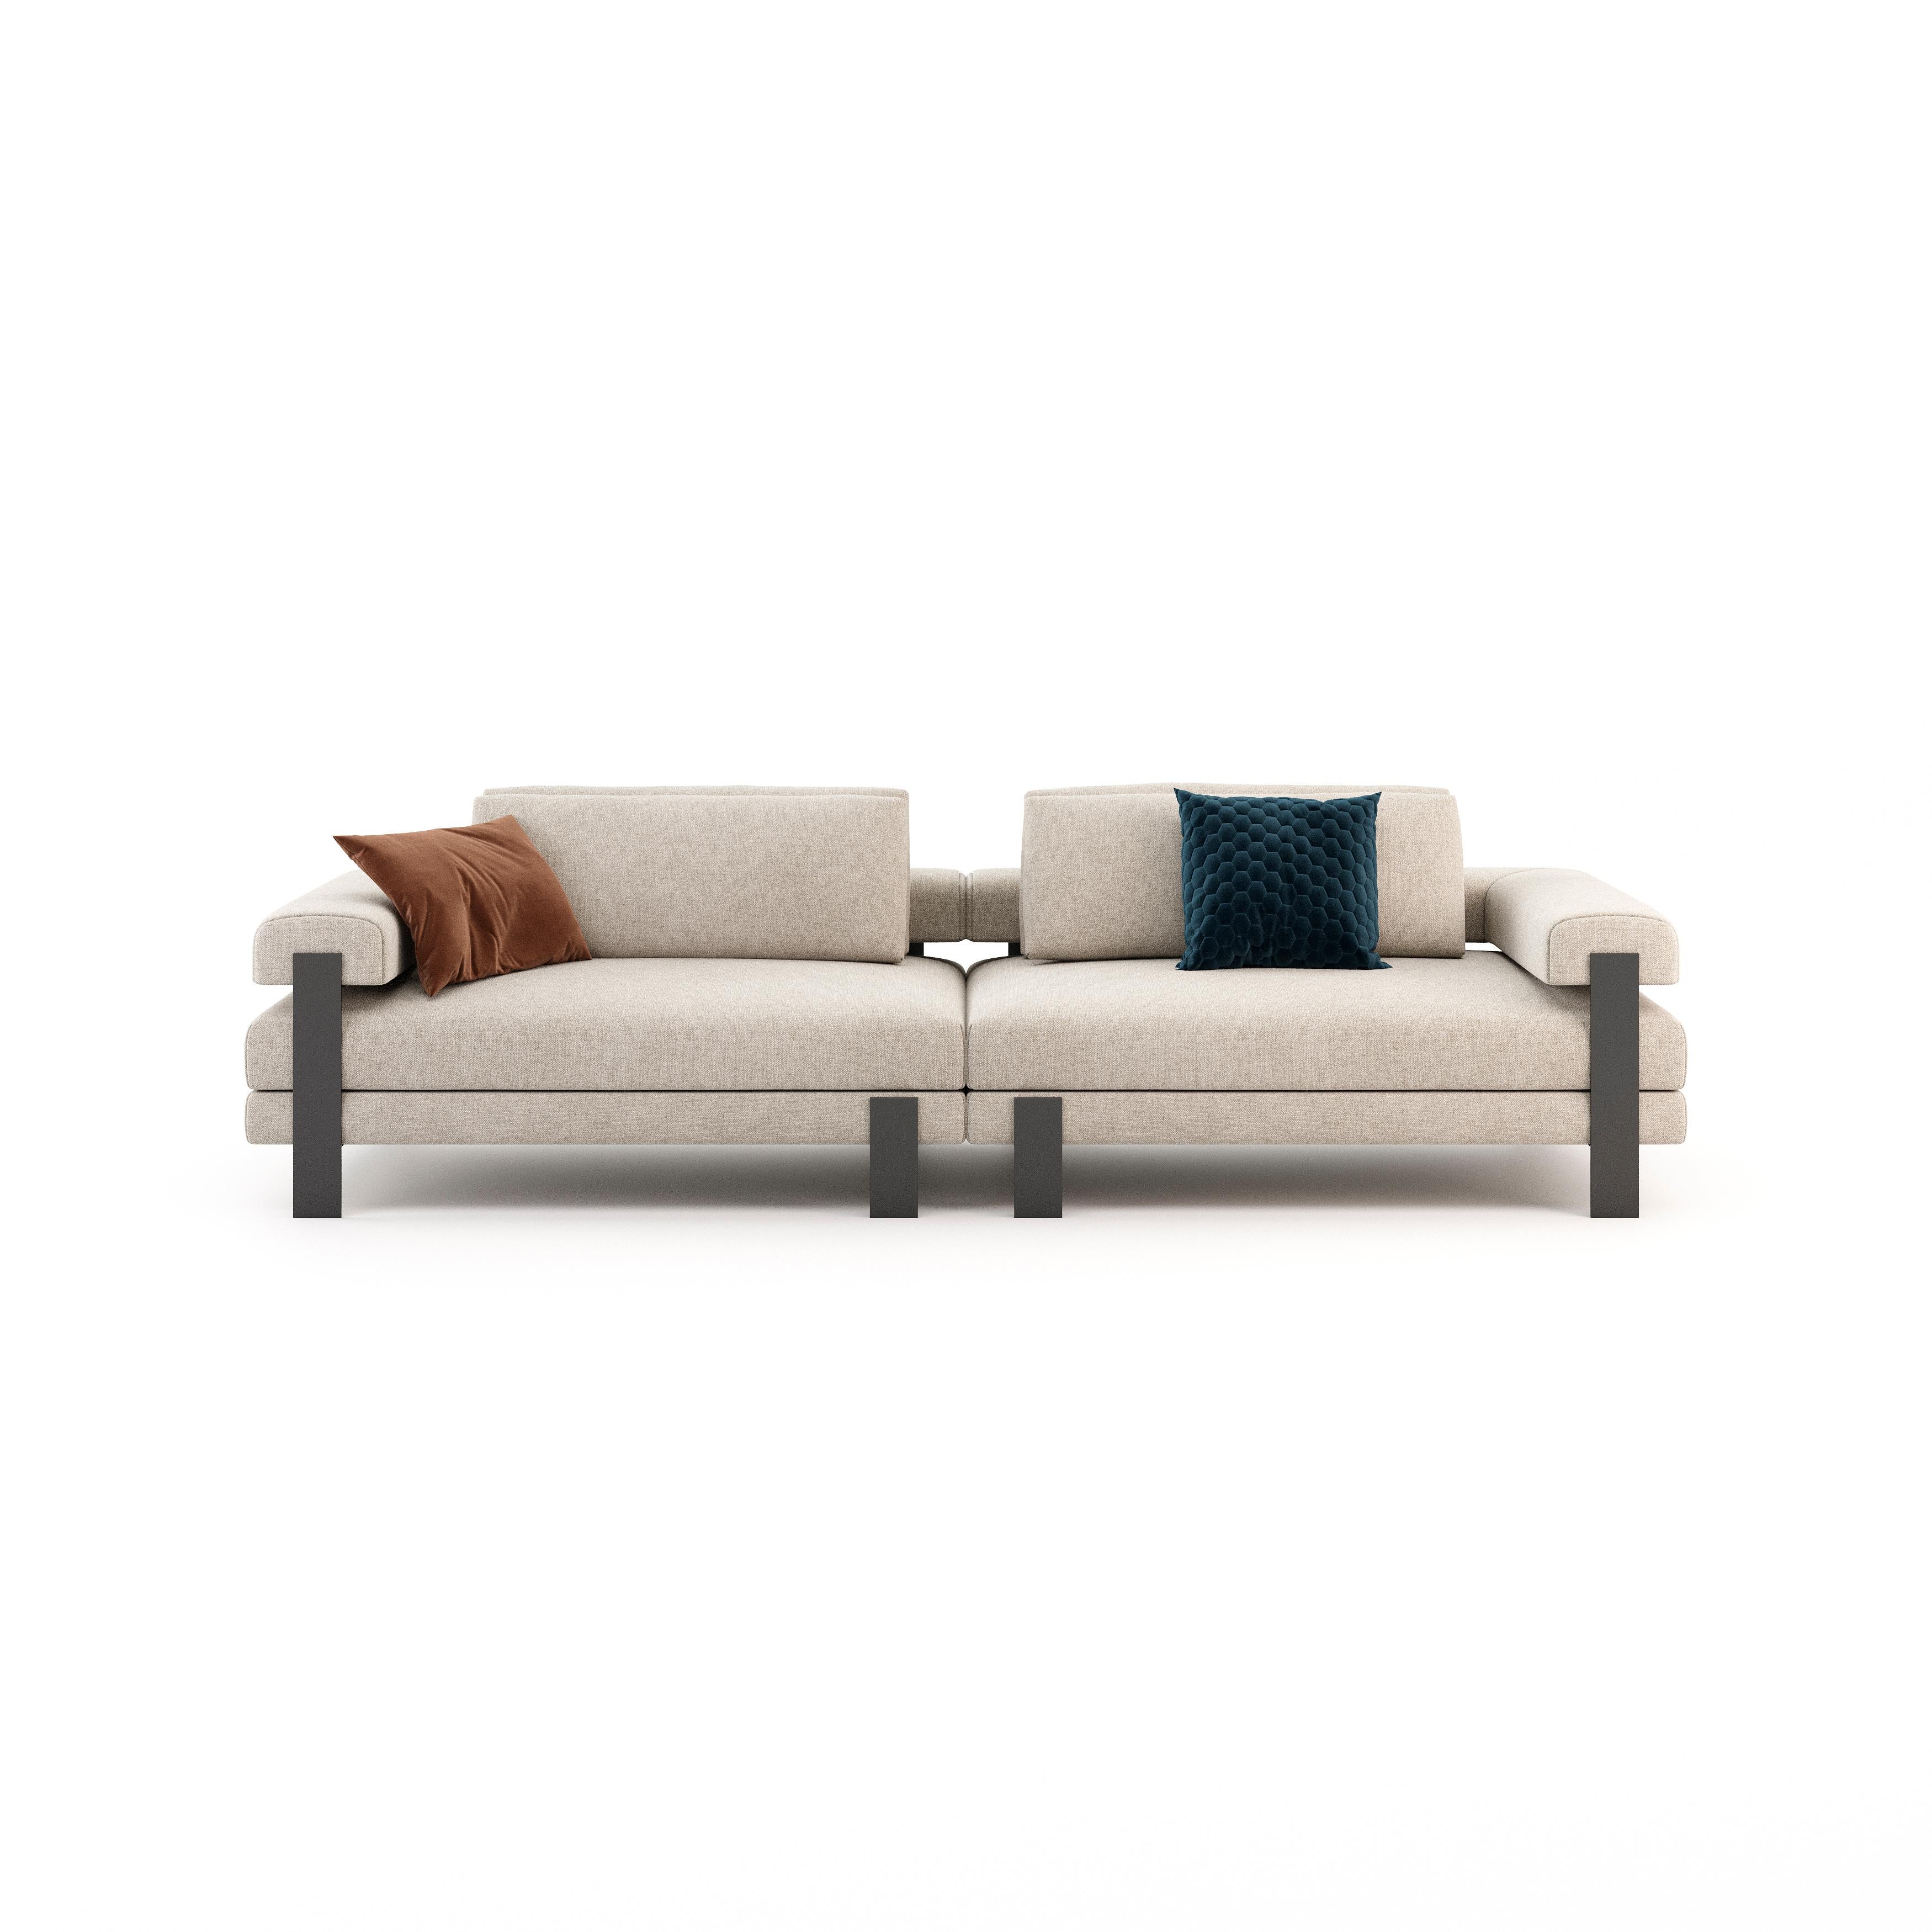 Davis sofa by Laskasas goes well with minimalistic interiors surrounded by Scandinavian furnishings. With two large cushions, this sofa features clean and cutting-edge lines.

* Available in different finishes.
** Also available with 94.49